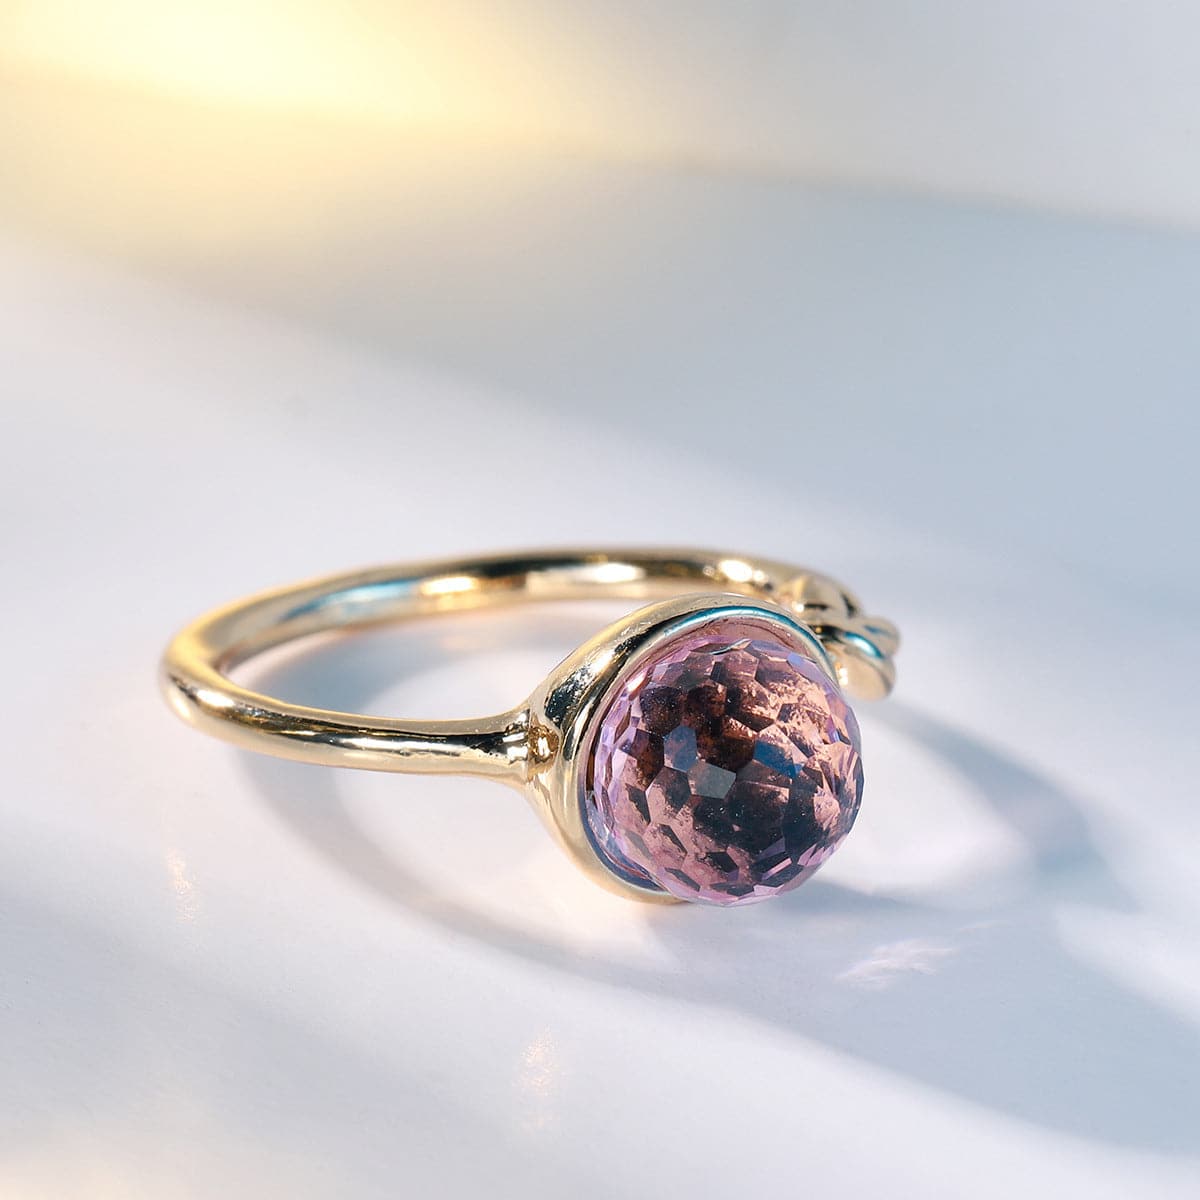 Pink Crystal & 18K Gold-Plated Knot-Accent Faceted Ring